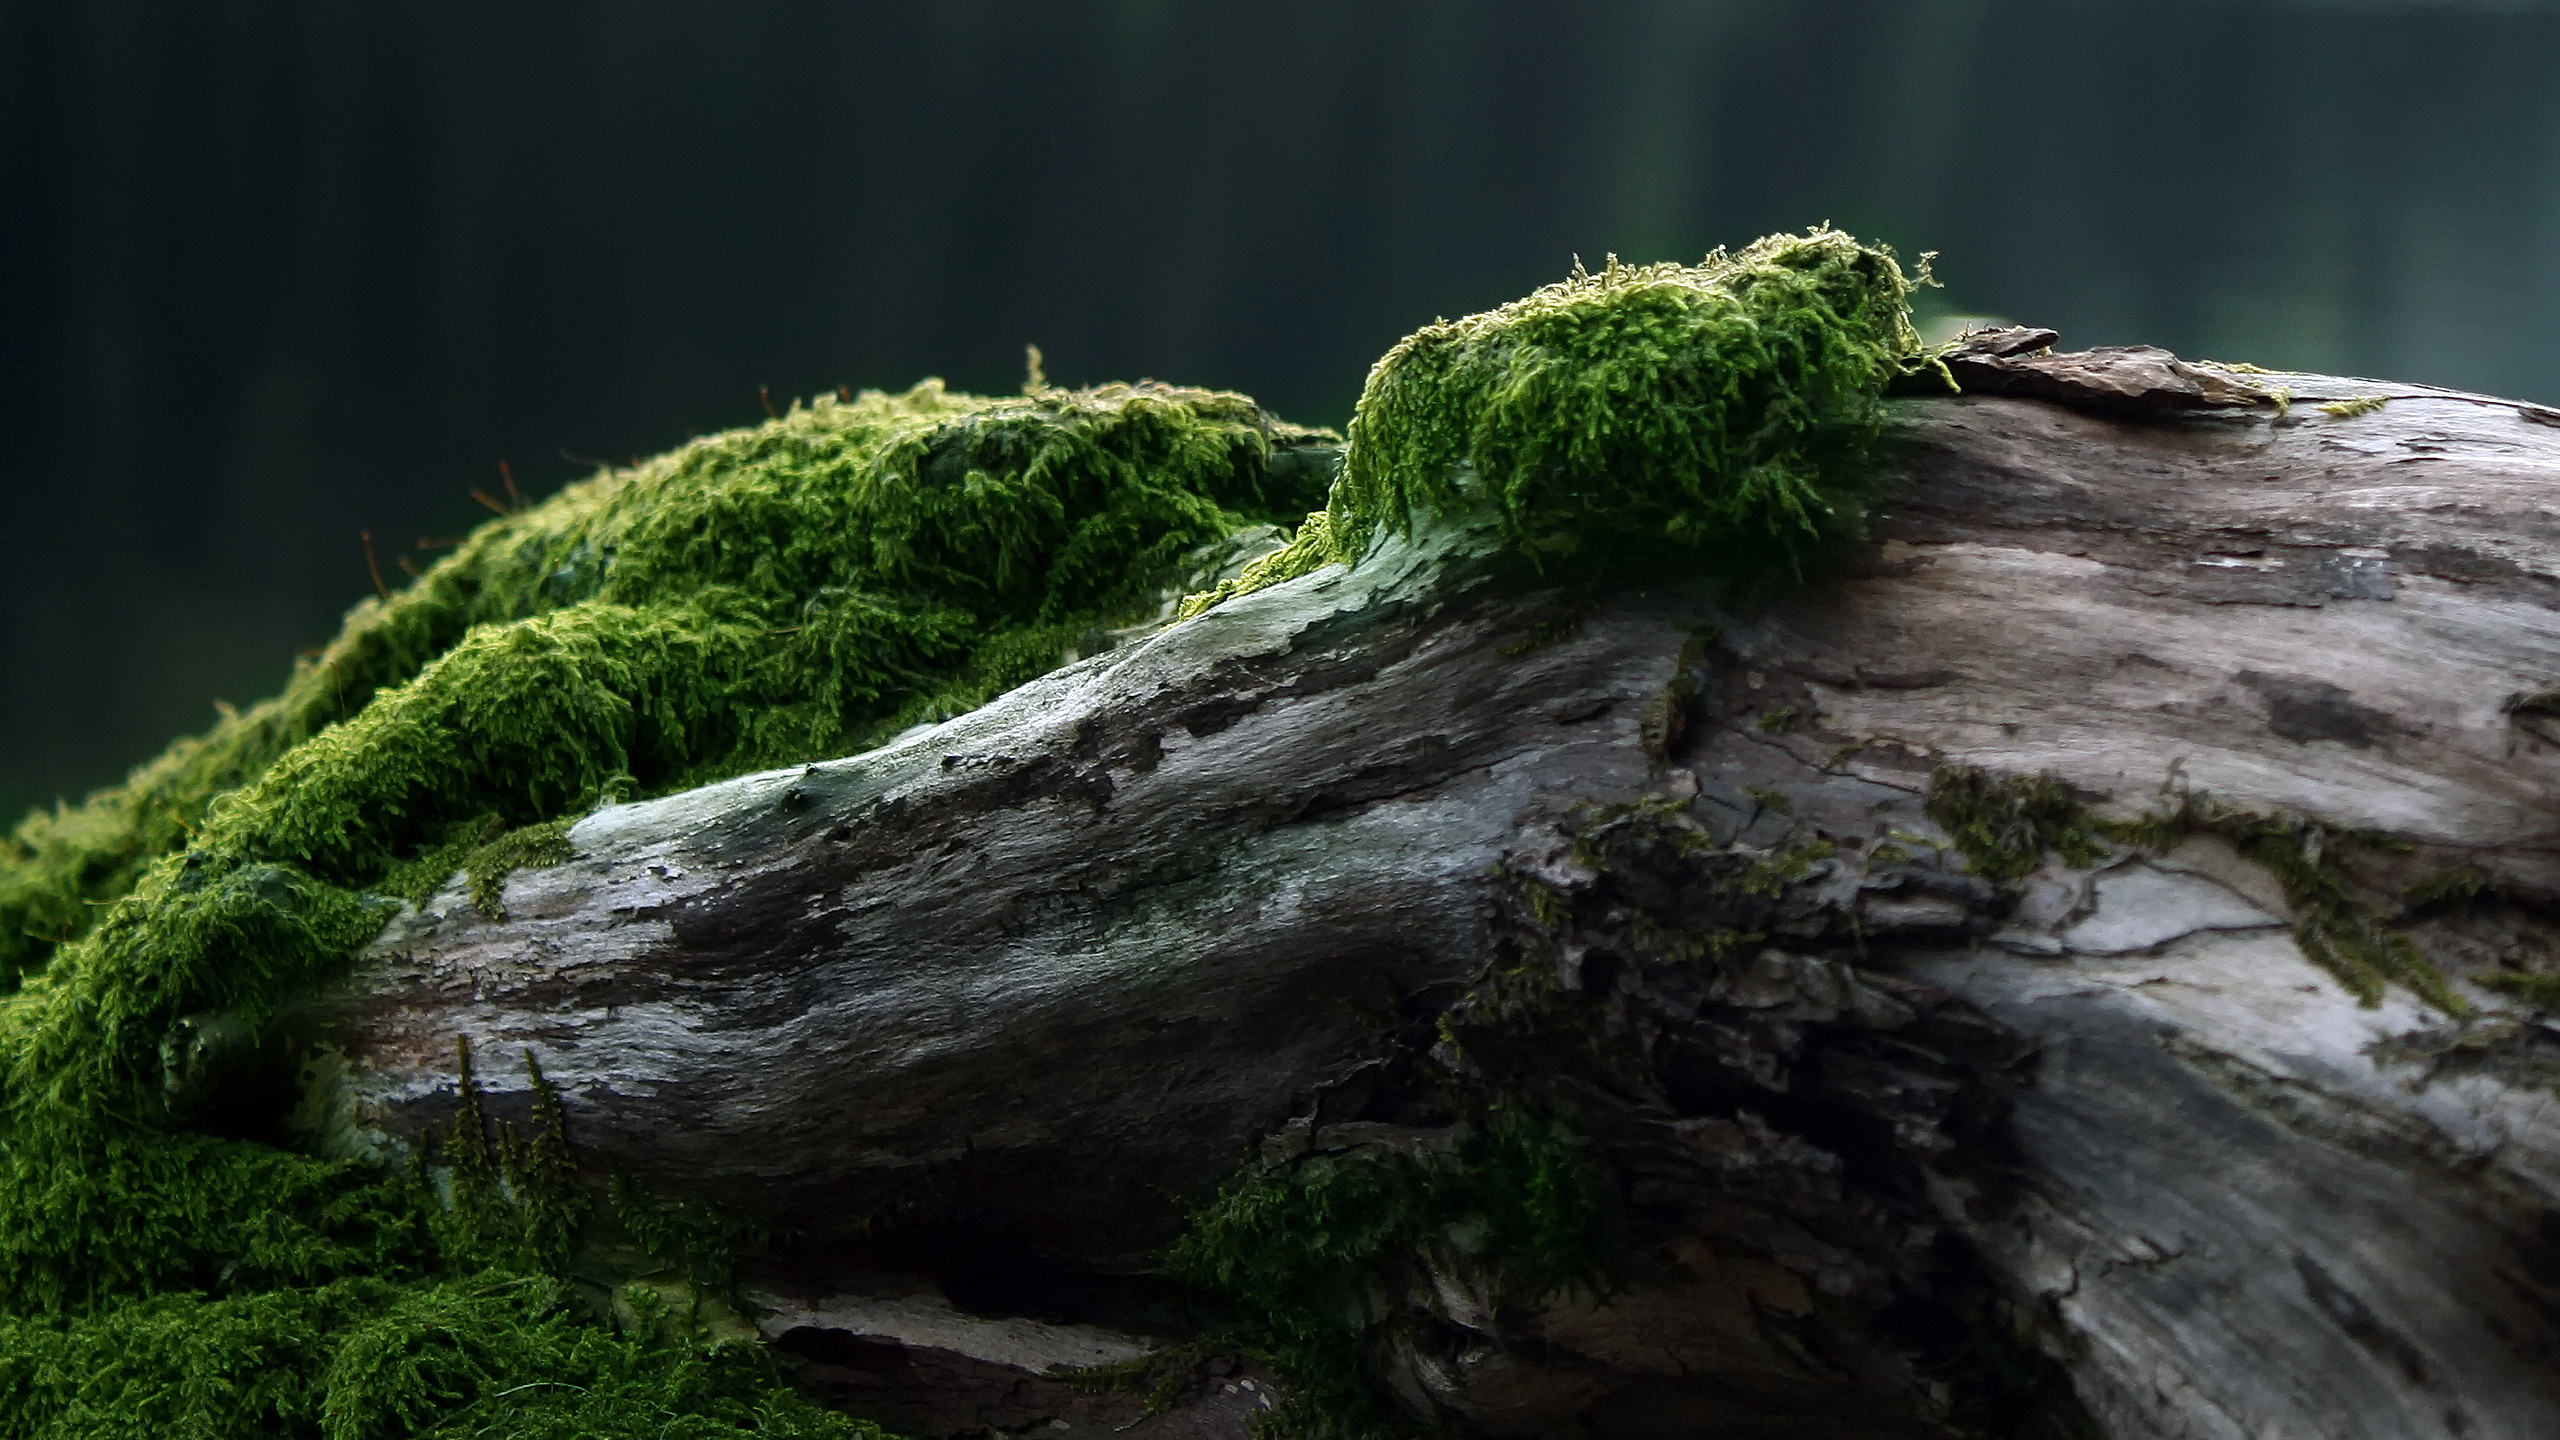 Moss on the old log wallpapers and images - wallpapers ...